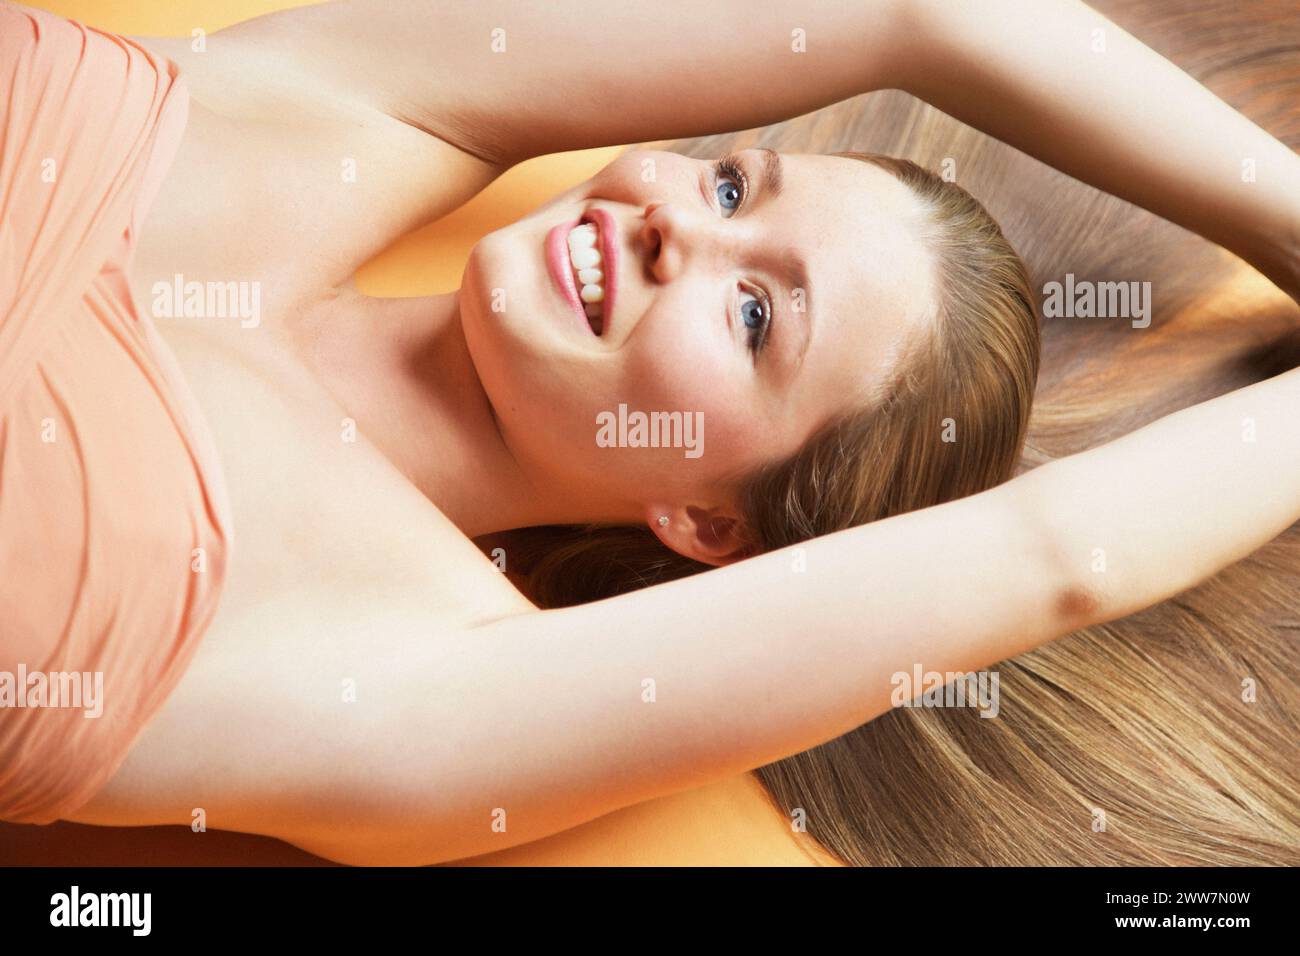 Young Woman with Long Hair, Elevated view Stock Photo